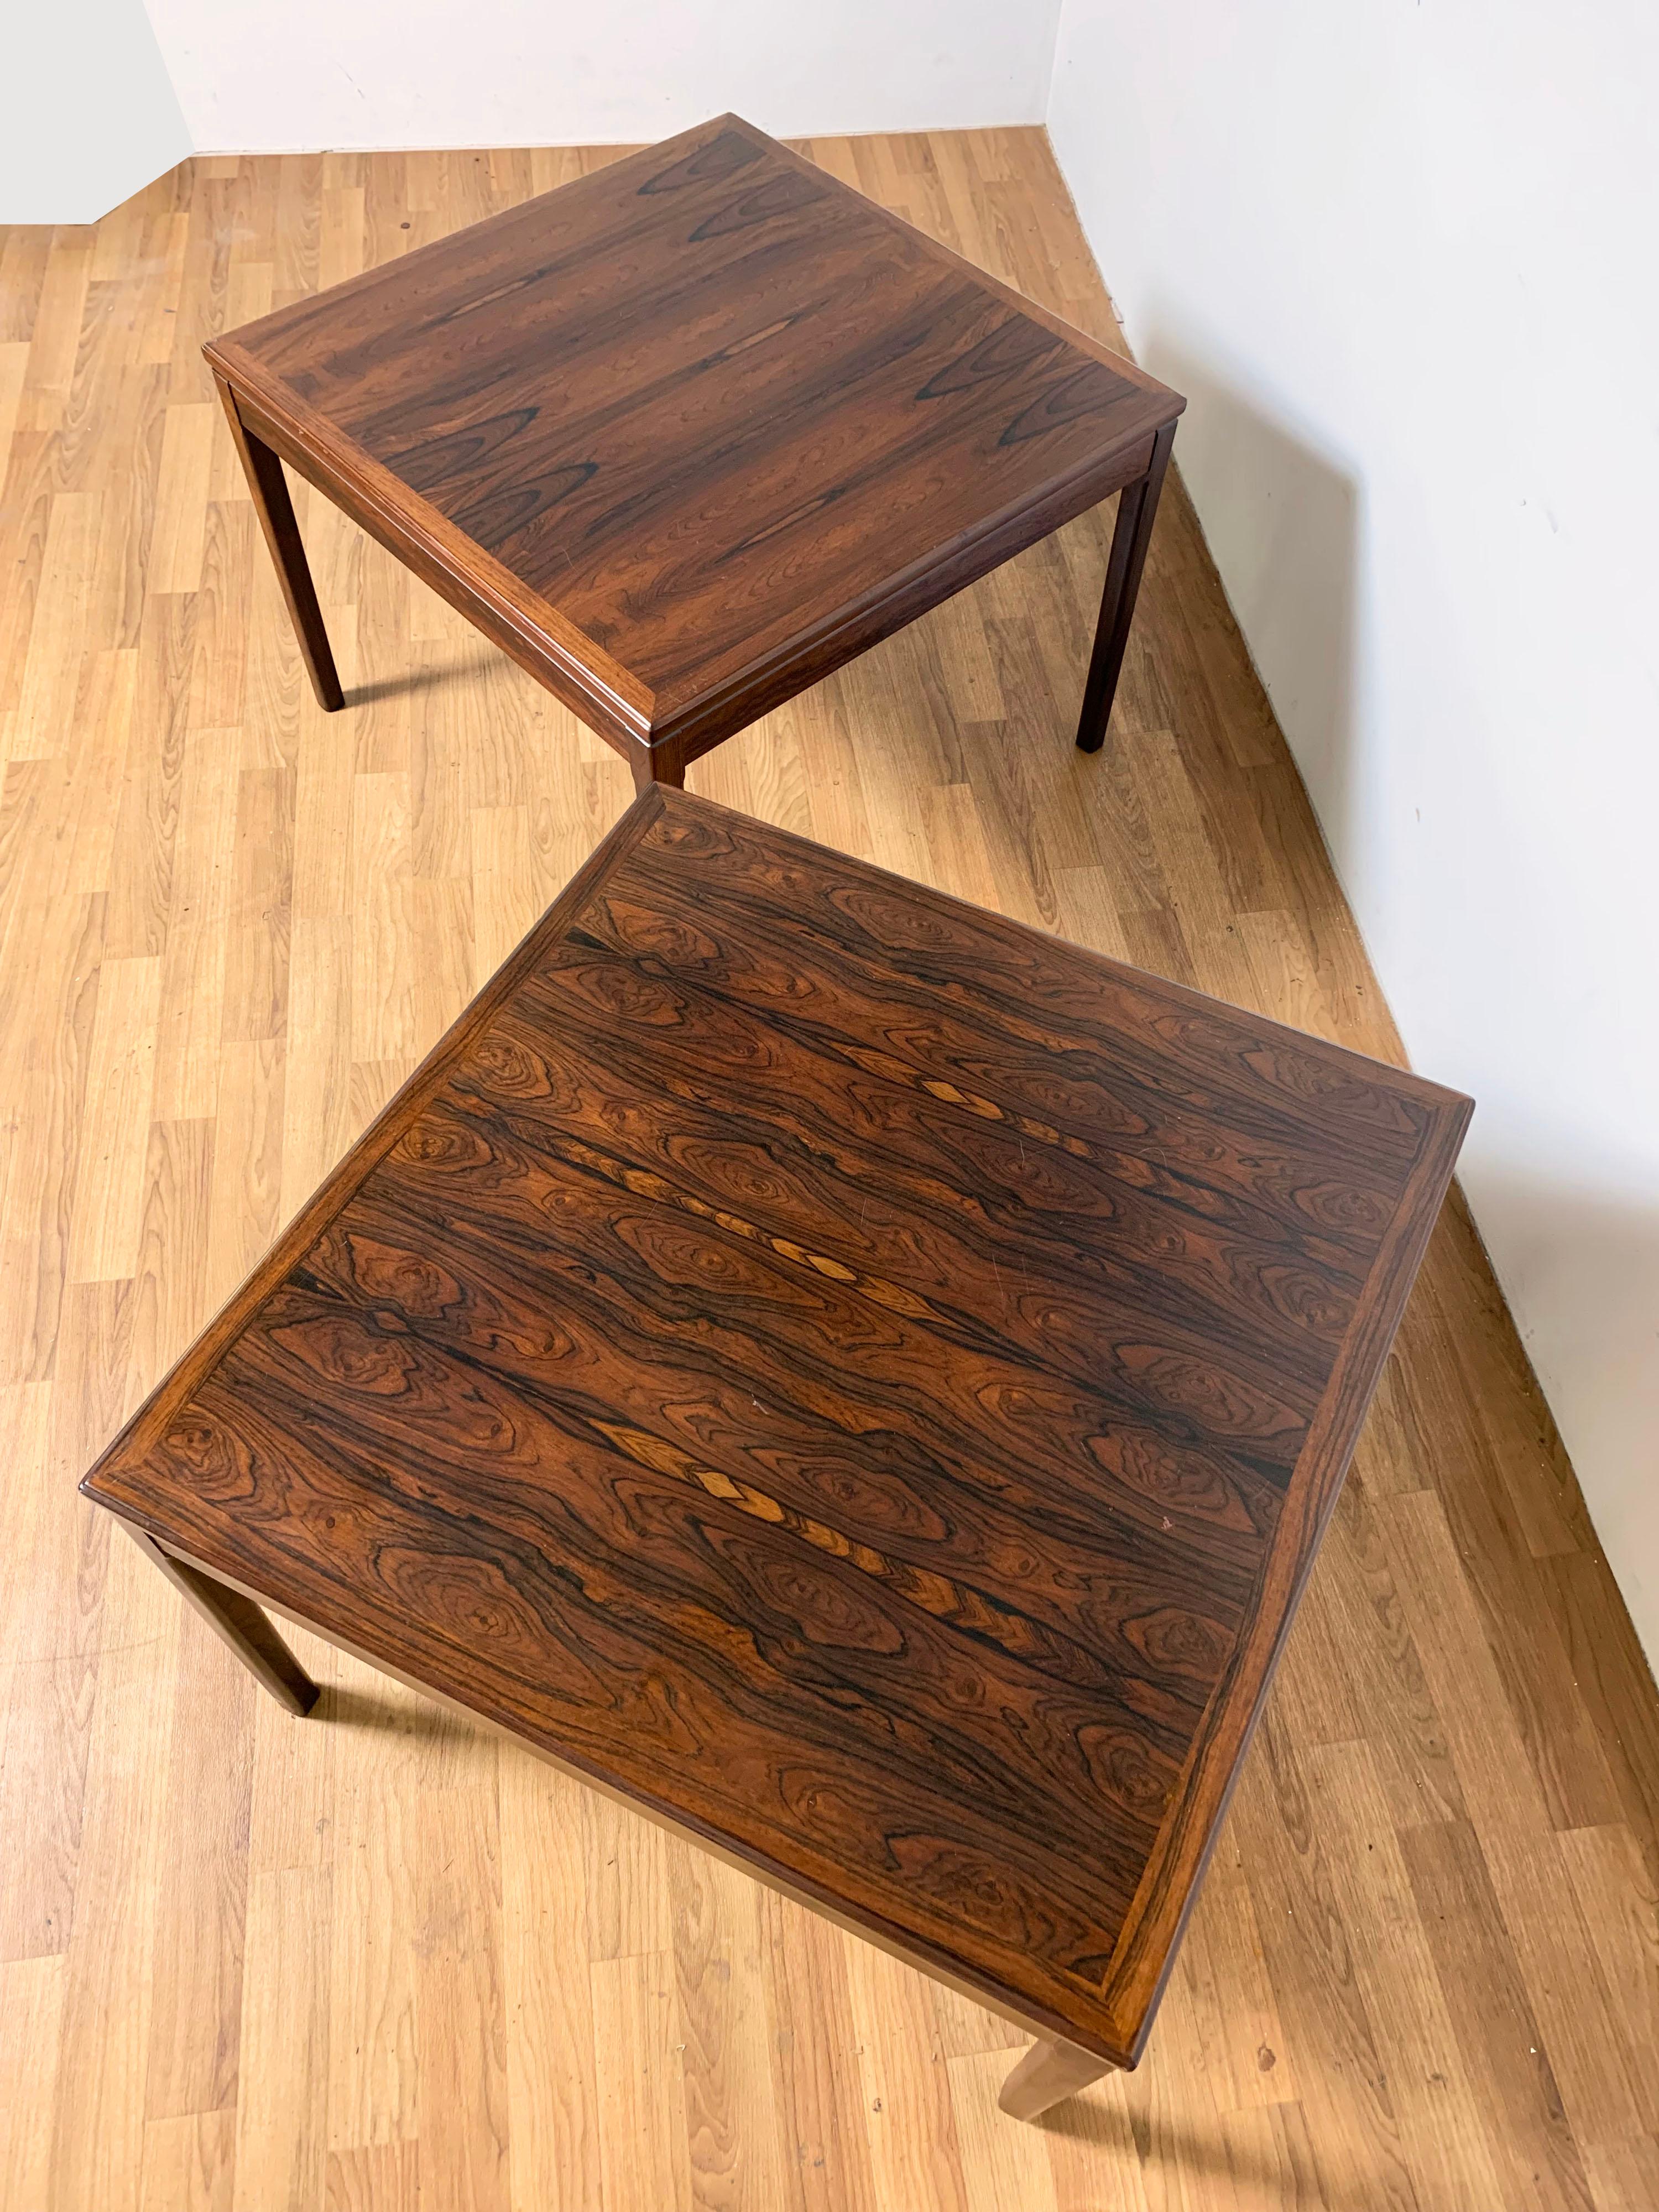 Pair of side tables in rosewood, made in Norway circa 1970s by Sunn Expo Ltd.